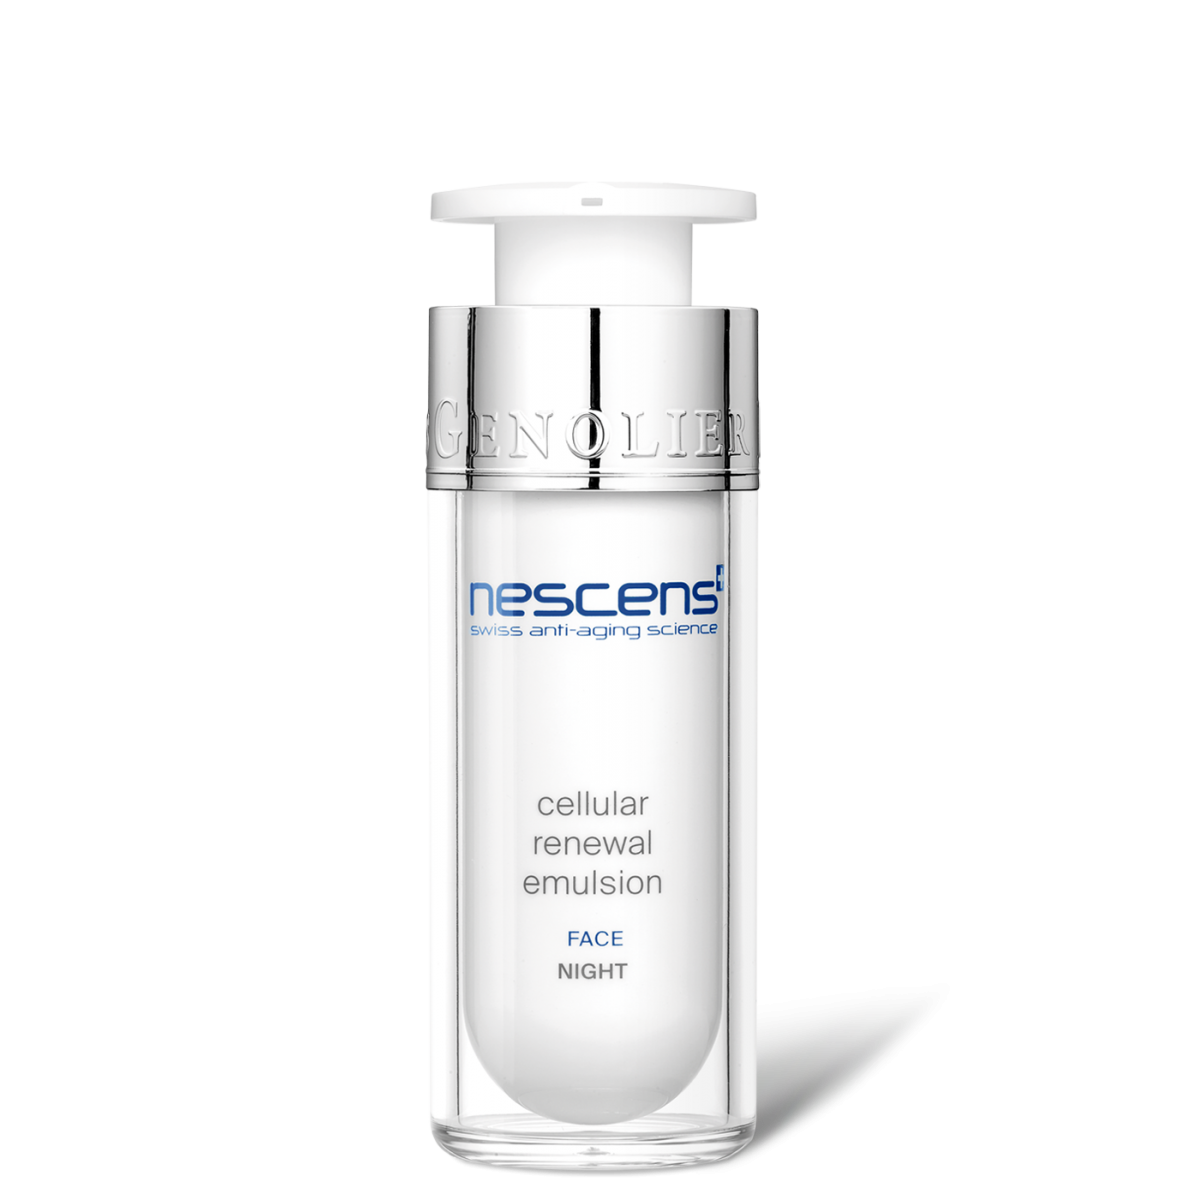 The Cellular Renewal Emulsion Night - Face, has a powerful anti-slackening action. Skin is smoother and firmer - NS102